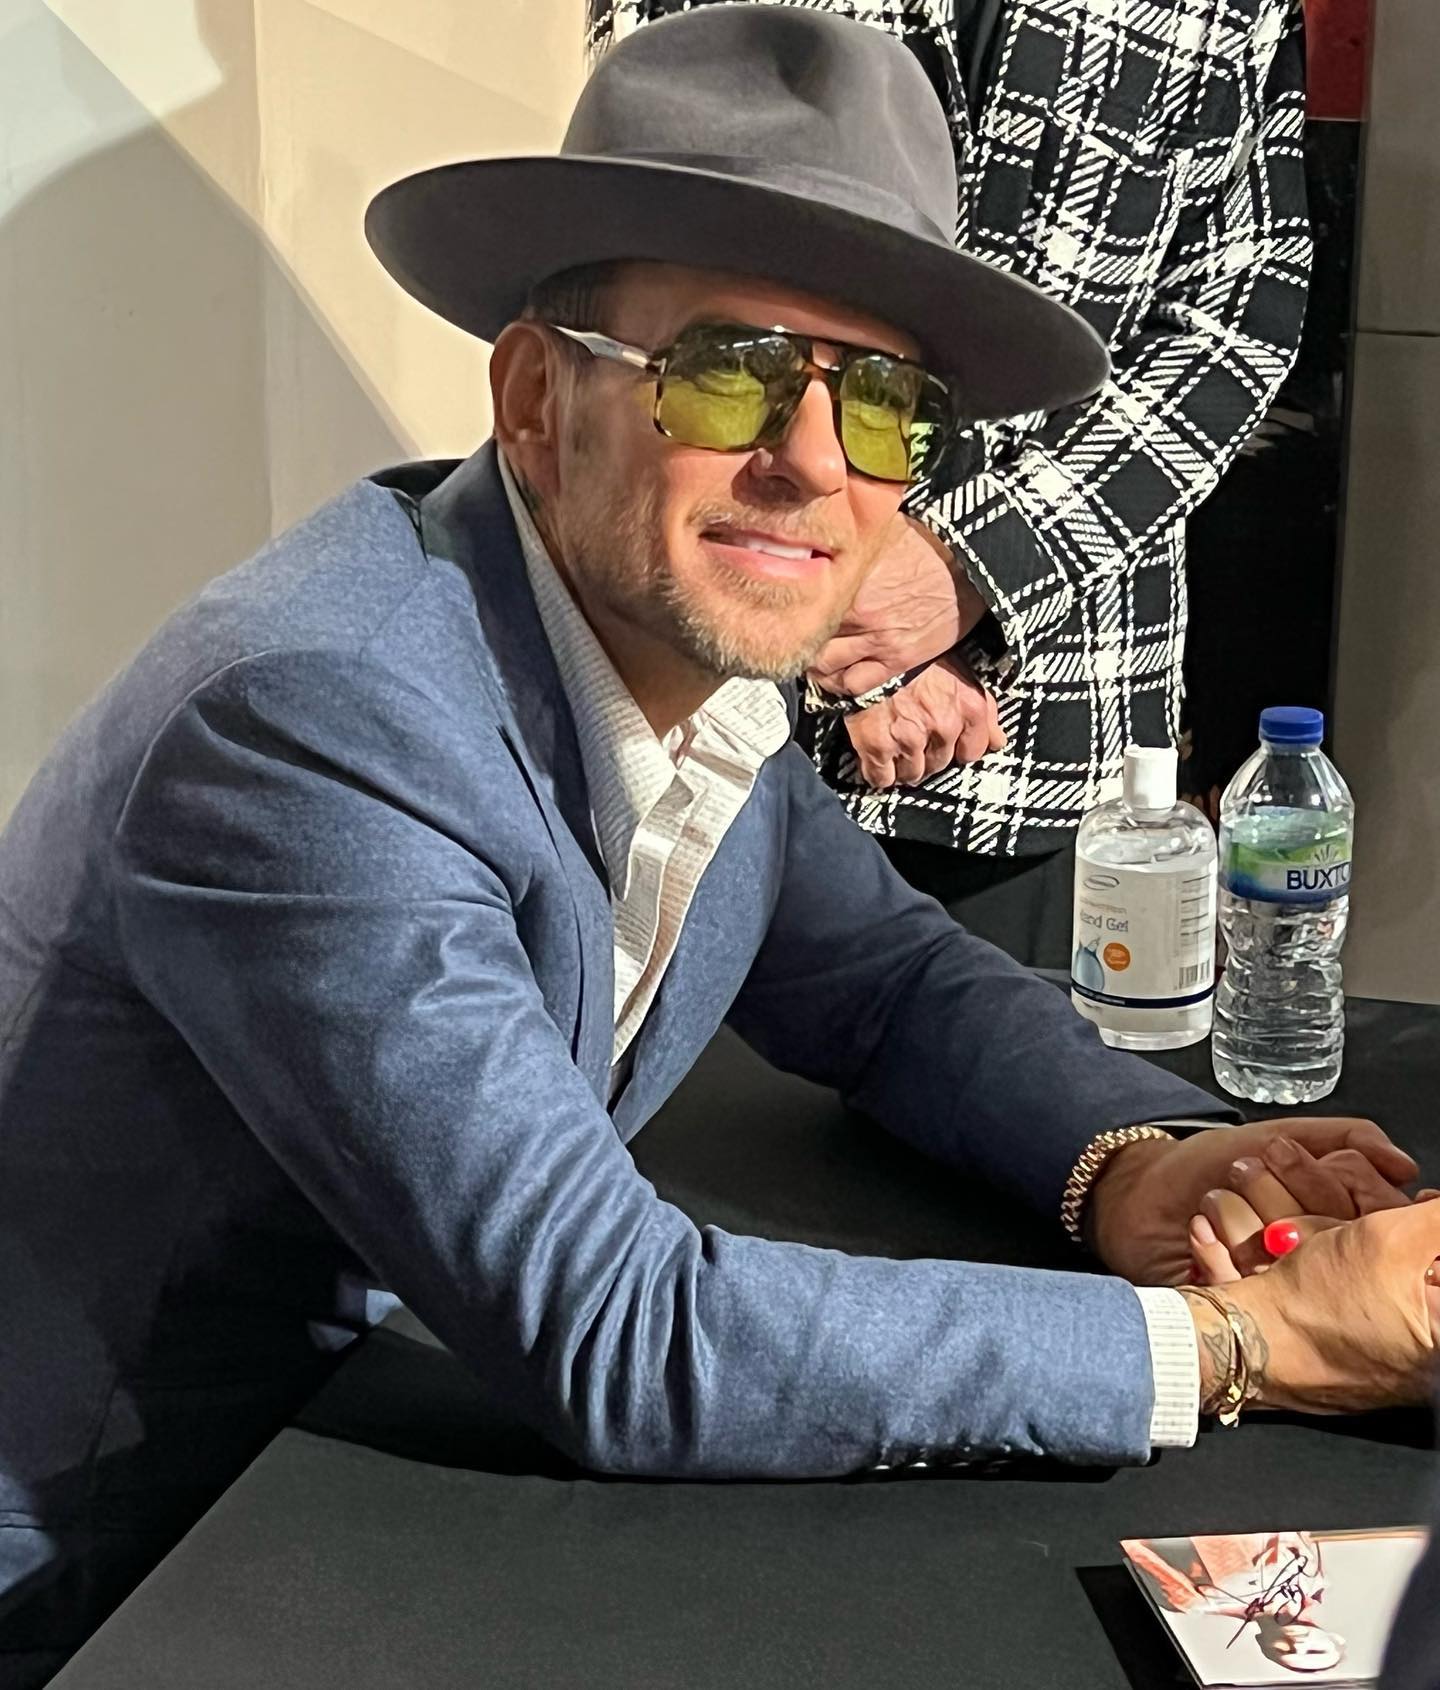 Matt Goss signed his fans albums for over 4 hours at HMV Westfield White City today, chatting to his fans and having his photo taken with everyone who waited. This man makes sure every person in the queue gets their album signed, no matter how long it takes.
He is a true gentleman!

#mattgoss #bros #westfieldwhitecity #newmusic #music #singer #london #songwriter #singersongwriter #instamusic #musician #musicartist #musiciansofinstagram #musicbusiness #musicindustry #hmvwestfield #newalbum #newsingle #albumsigning #betterwithyou #thebeautifulunknown #saved